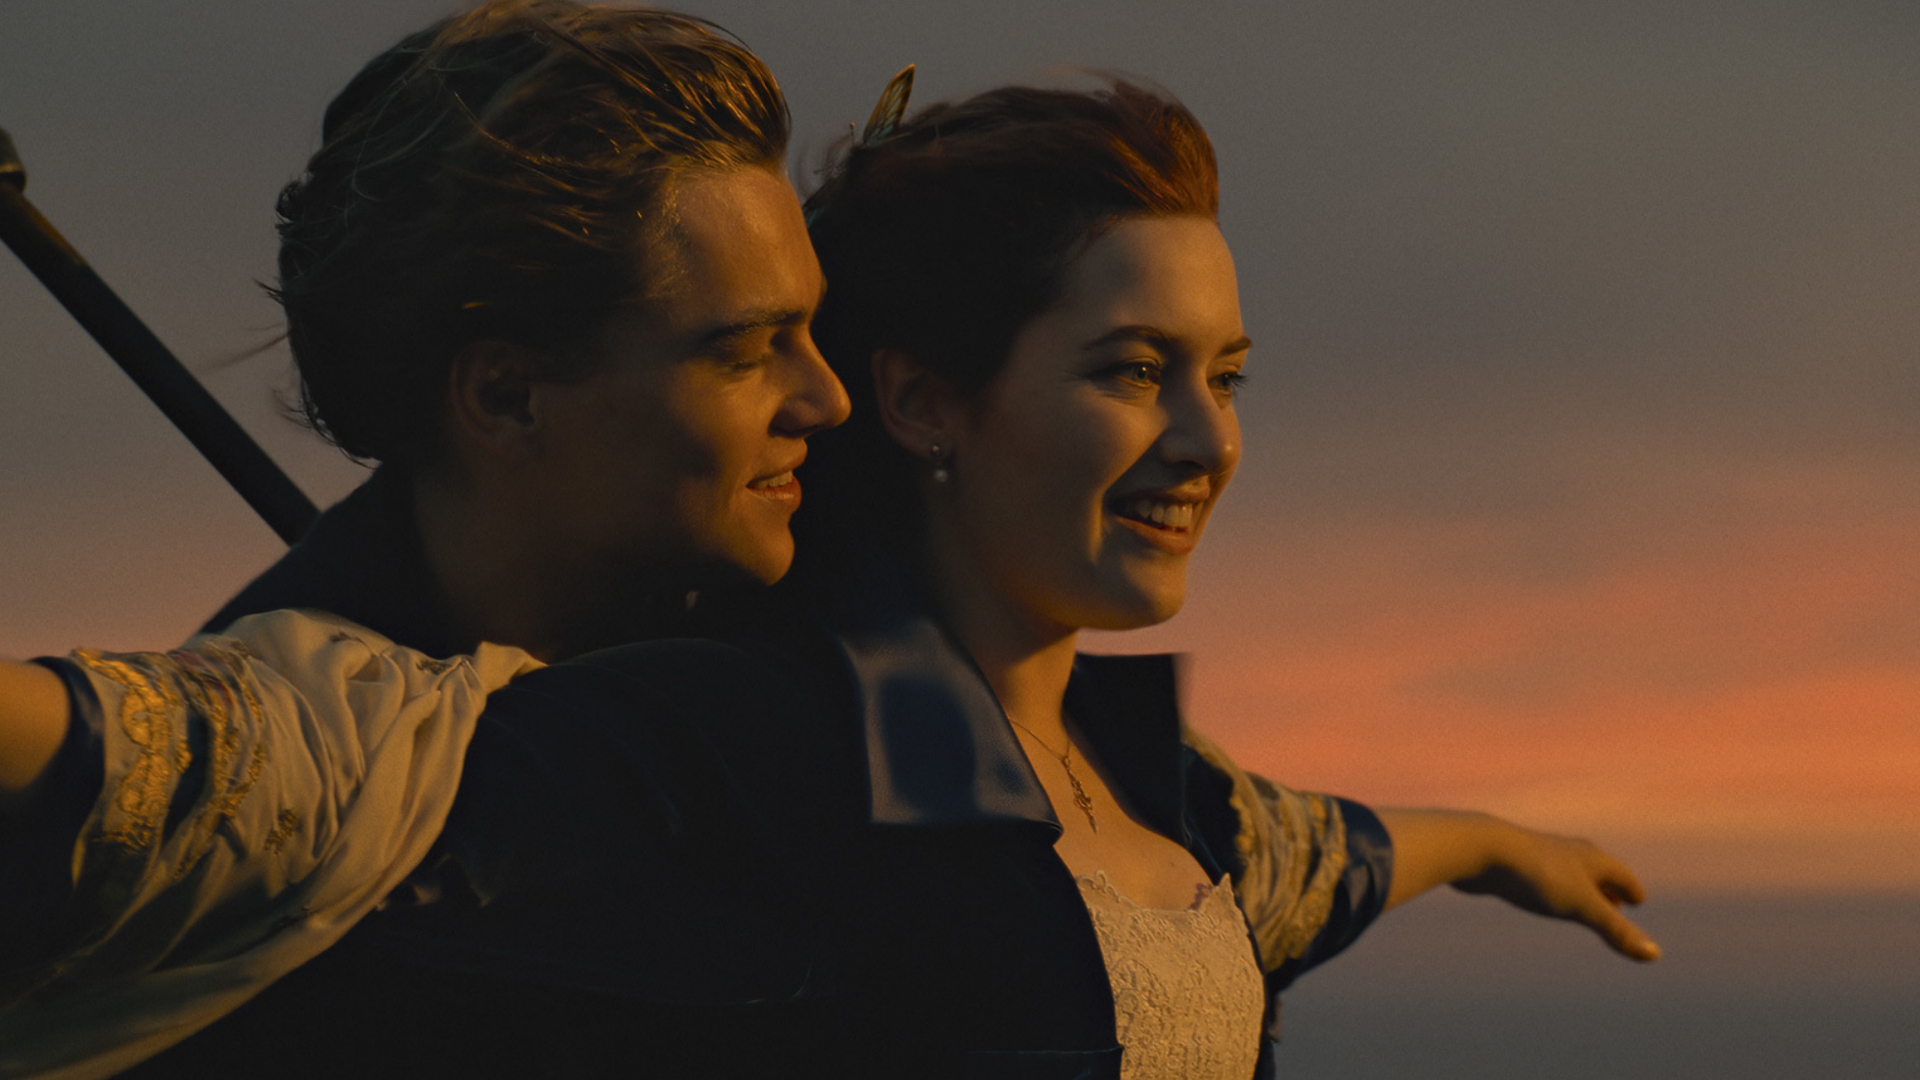 Titanic at 25: how James Cameron captured 1990s anxieties with pure  golden-age Hollywood style